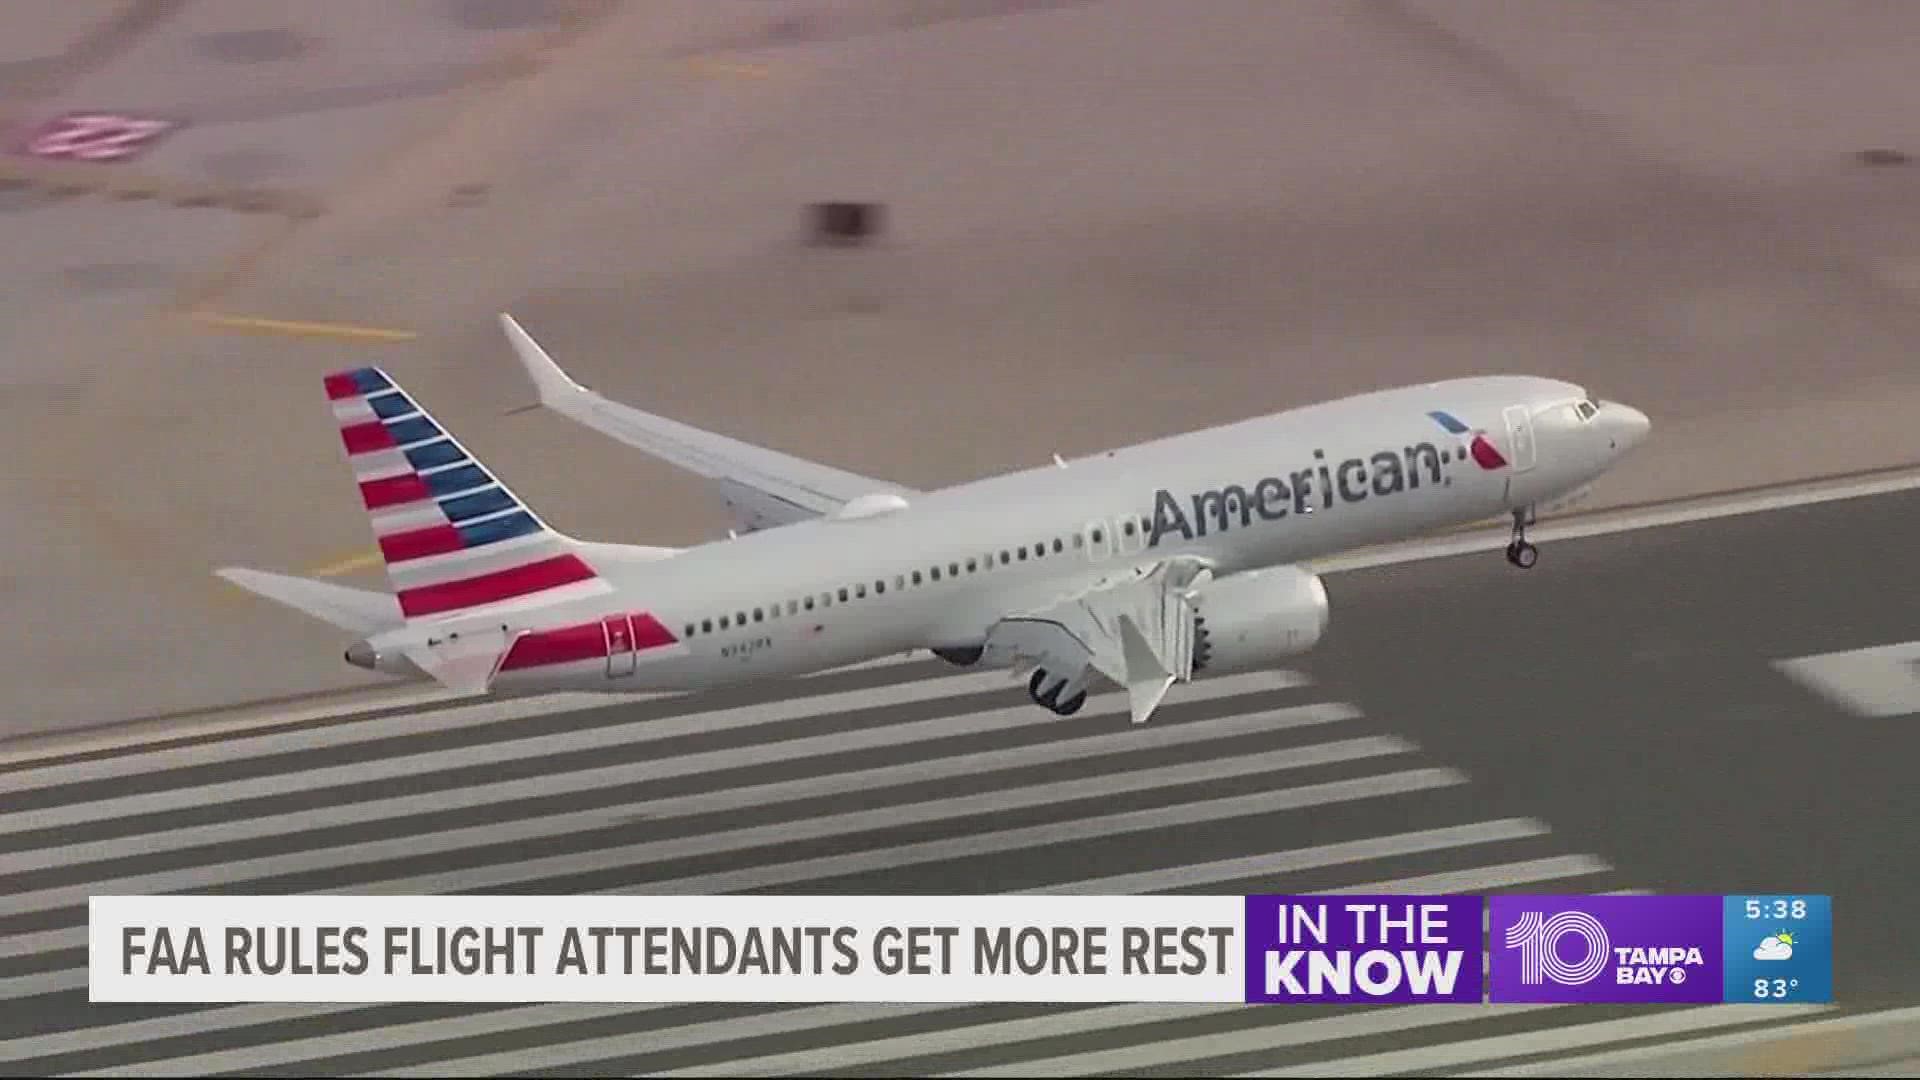 The rule goes into effect in 30 days, and airlines have up to 90 days to comply.